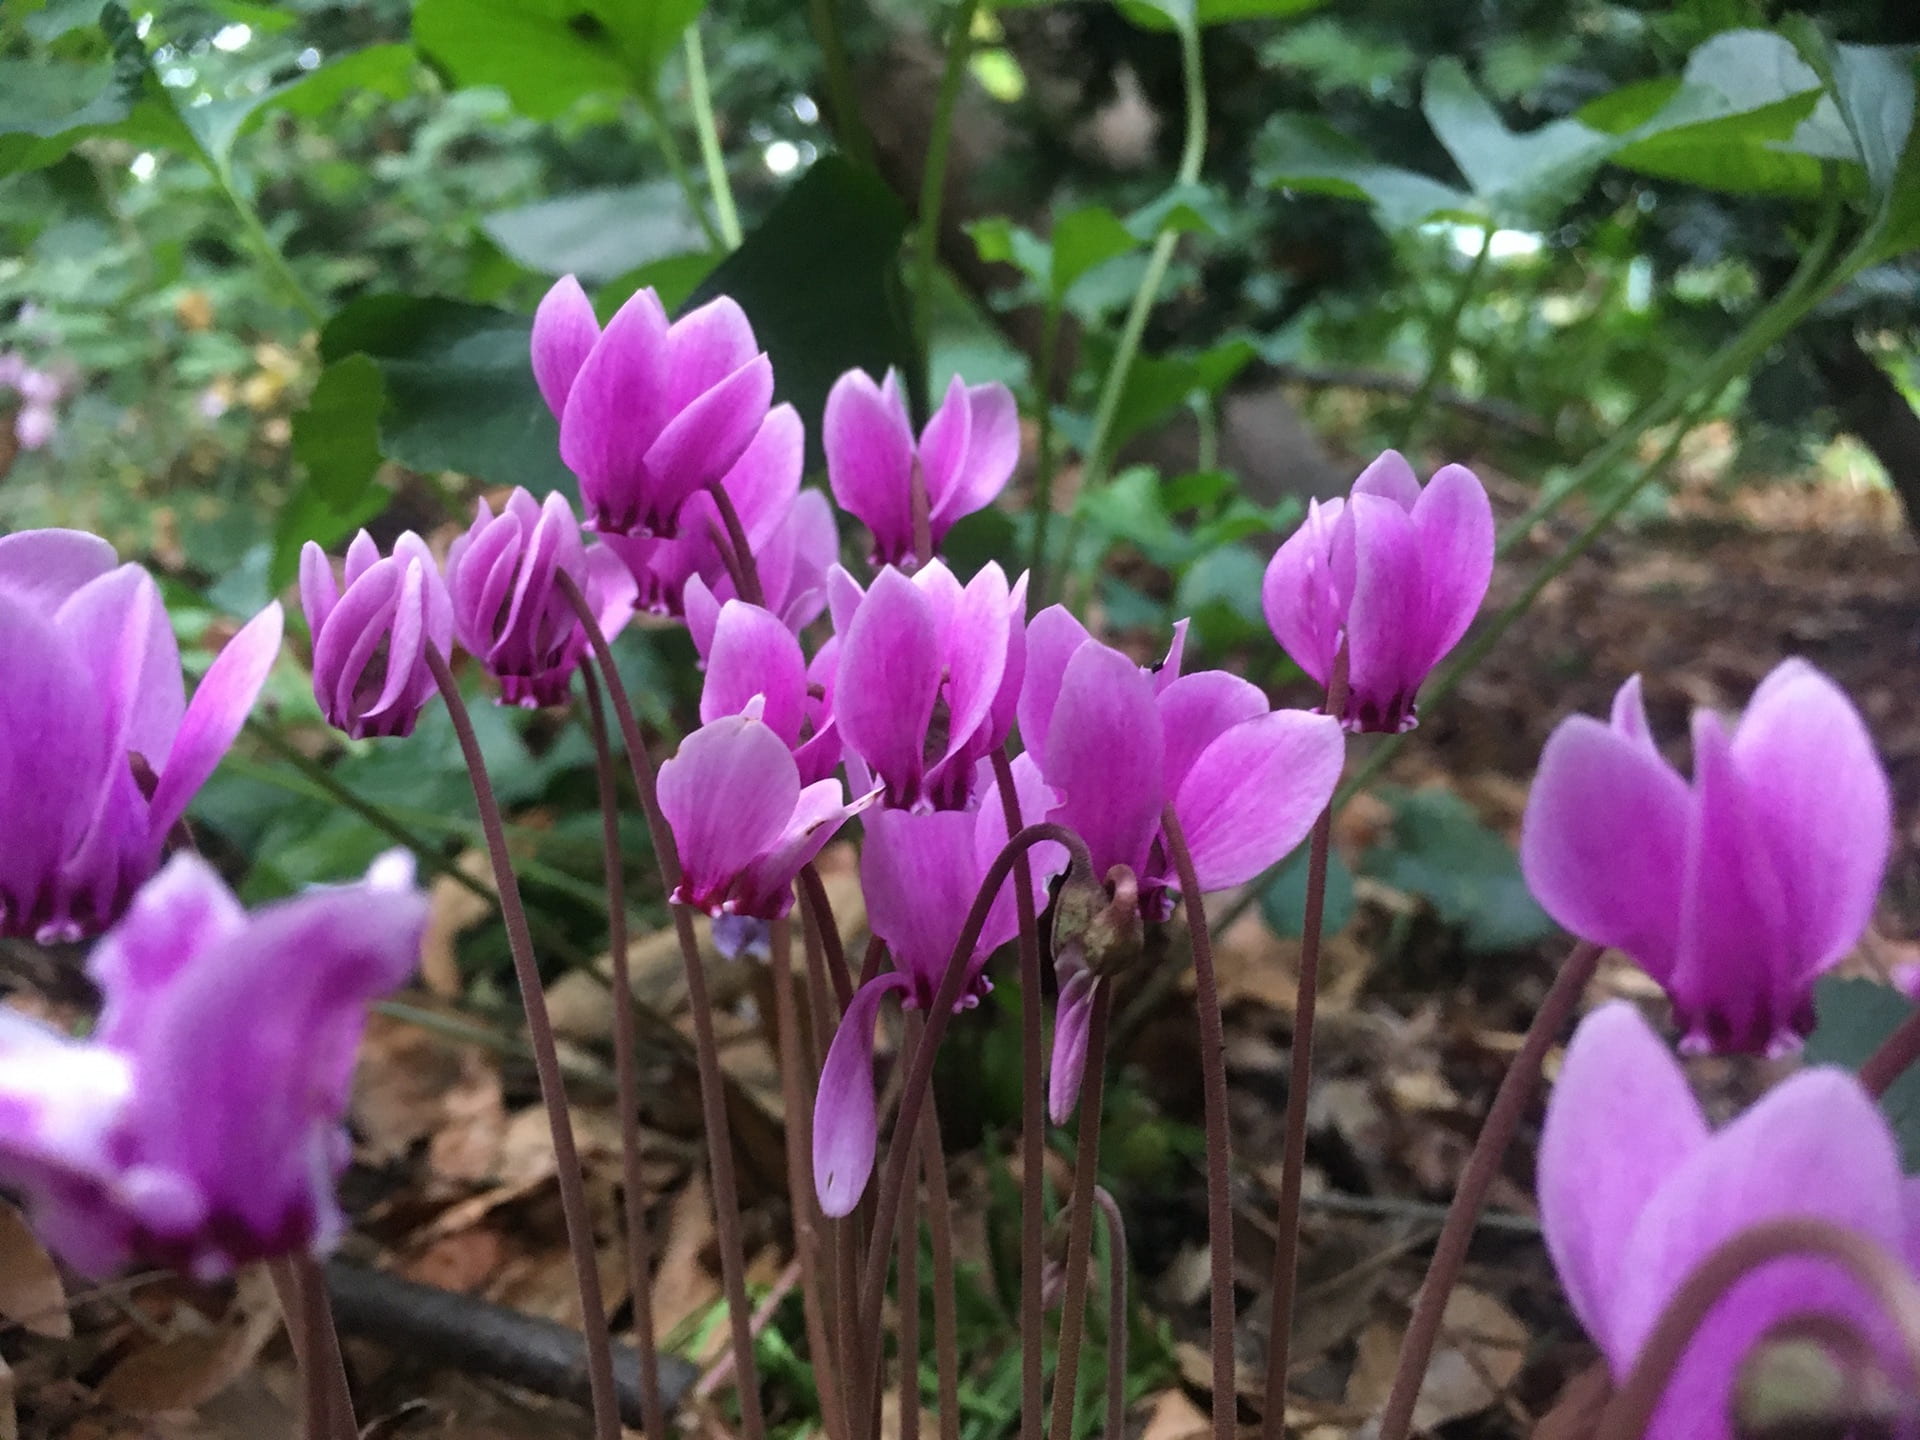 The flowers of Cyclamen hederifolium are like small jewels in the park.